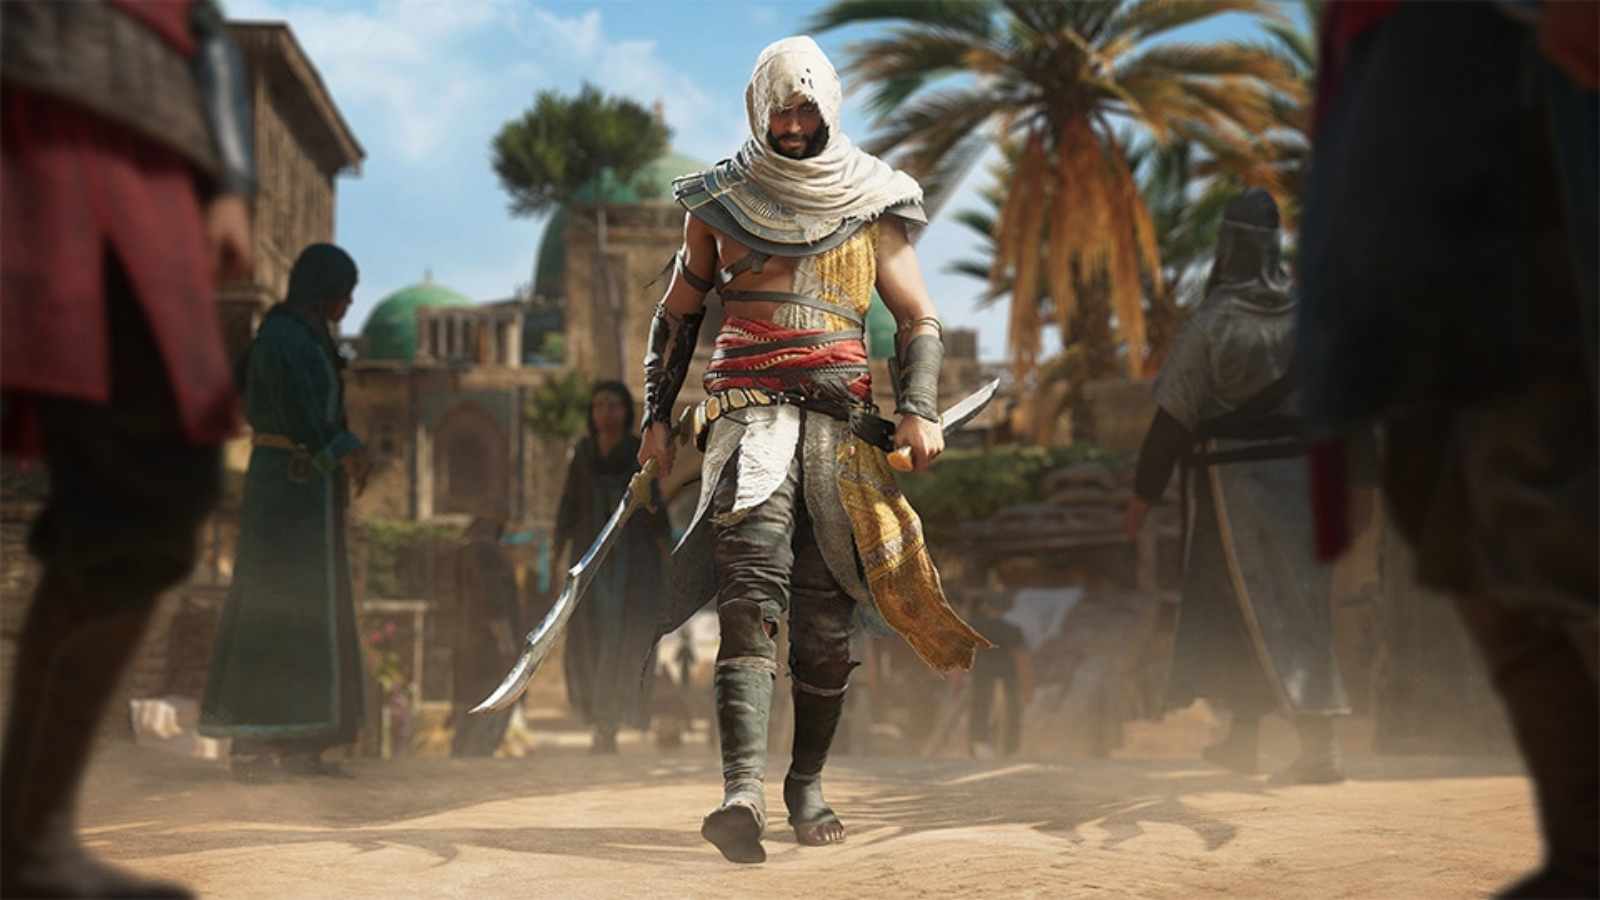 Is Assassin's Creed Mirage on Xbox Game Pass? - Dexerto